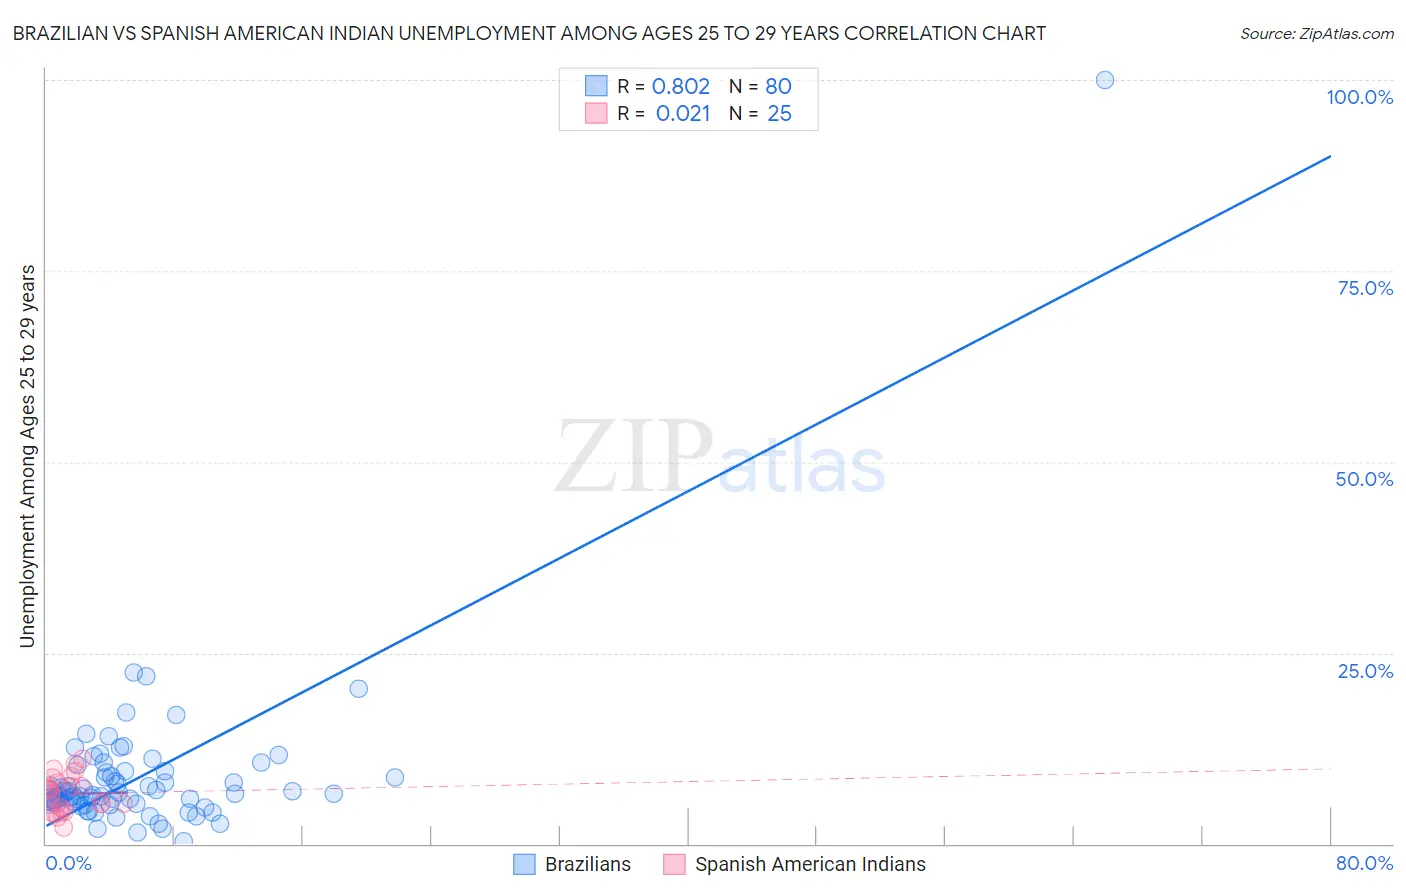 Brazilian vs Spanish American Indian Unemployment Among Ages 25 to 29 years